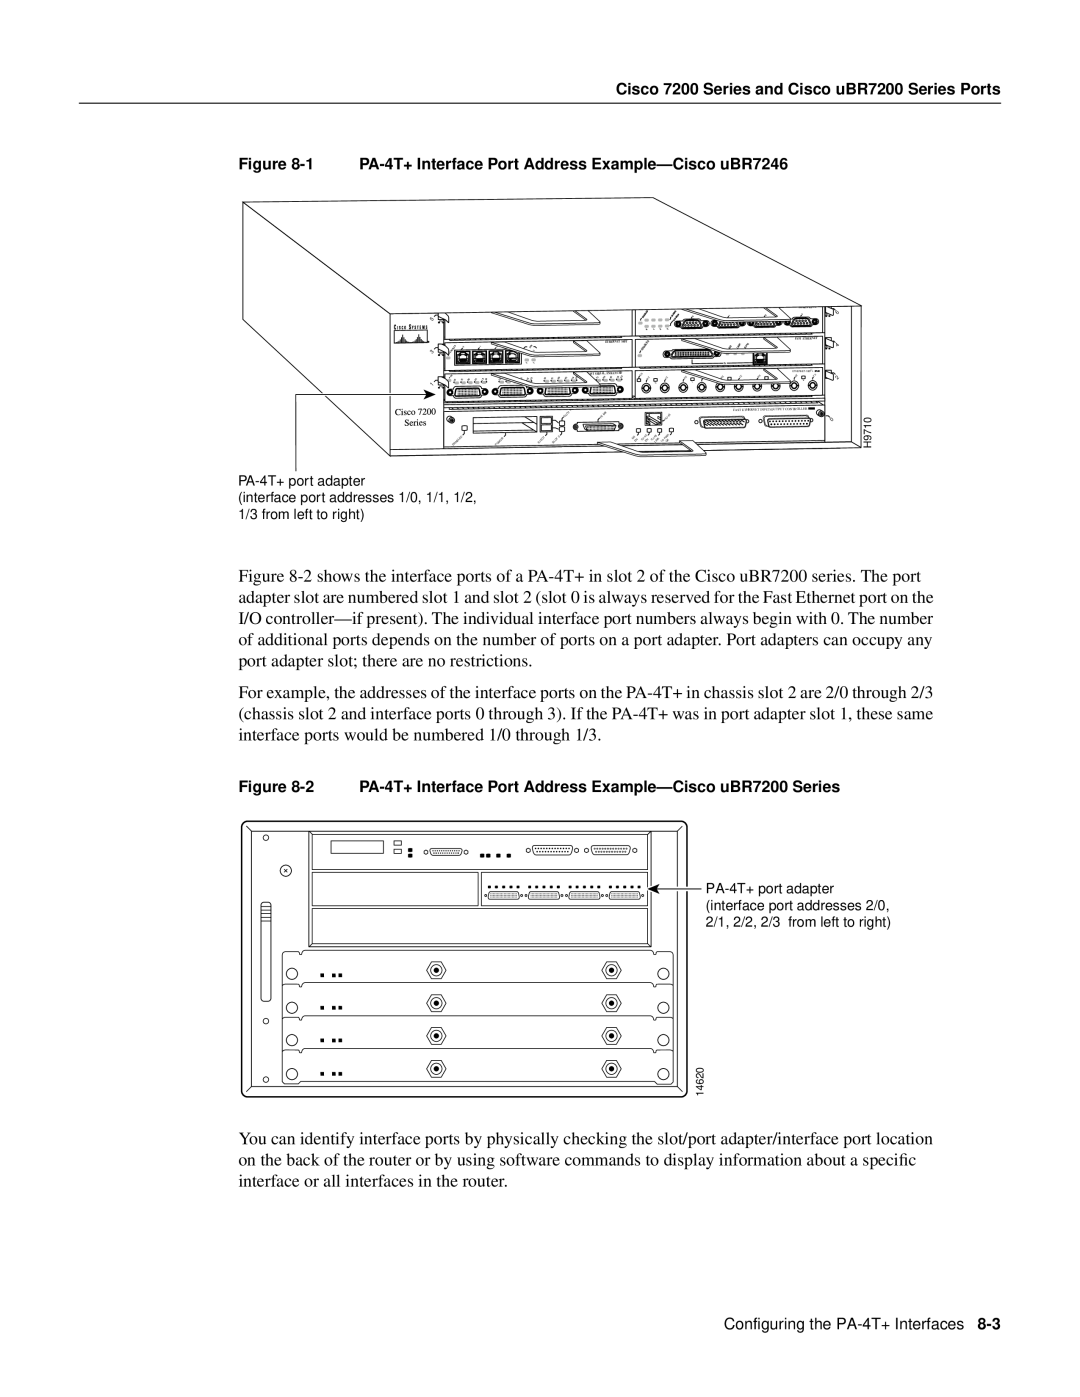 Cisco Systems manual Cisco 7200 Series and Cisco uBR7200 Series Ports, PA-4T+ port adapter 